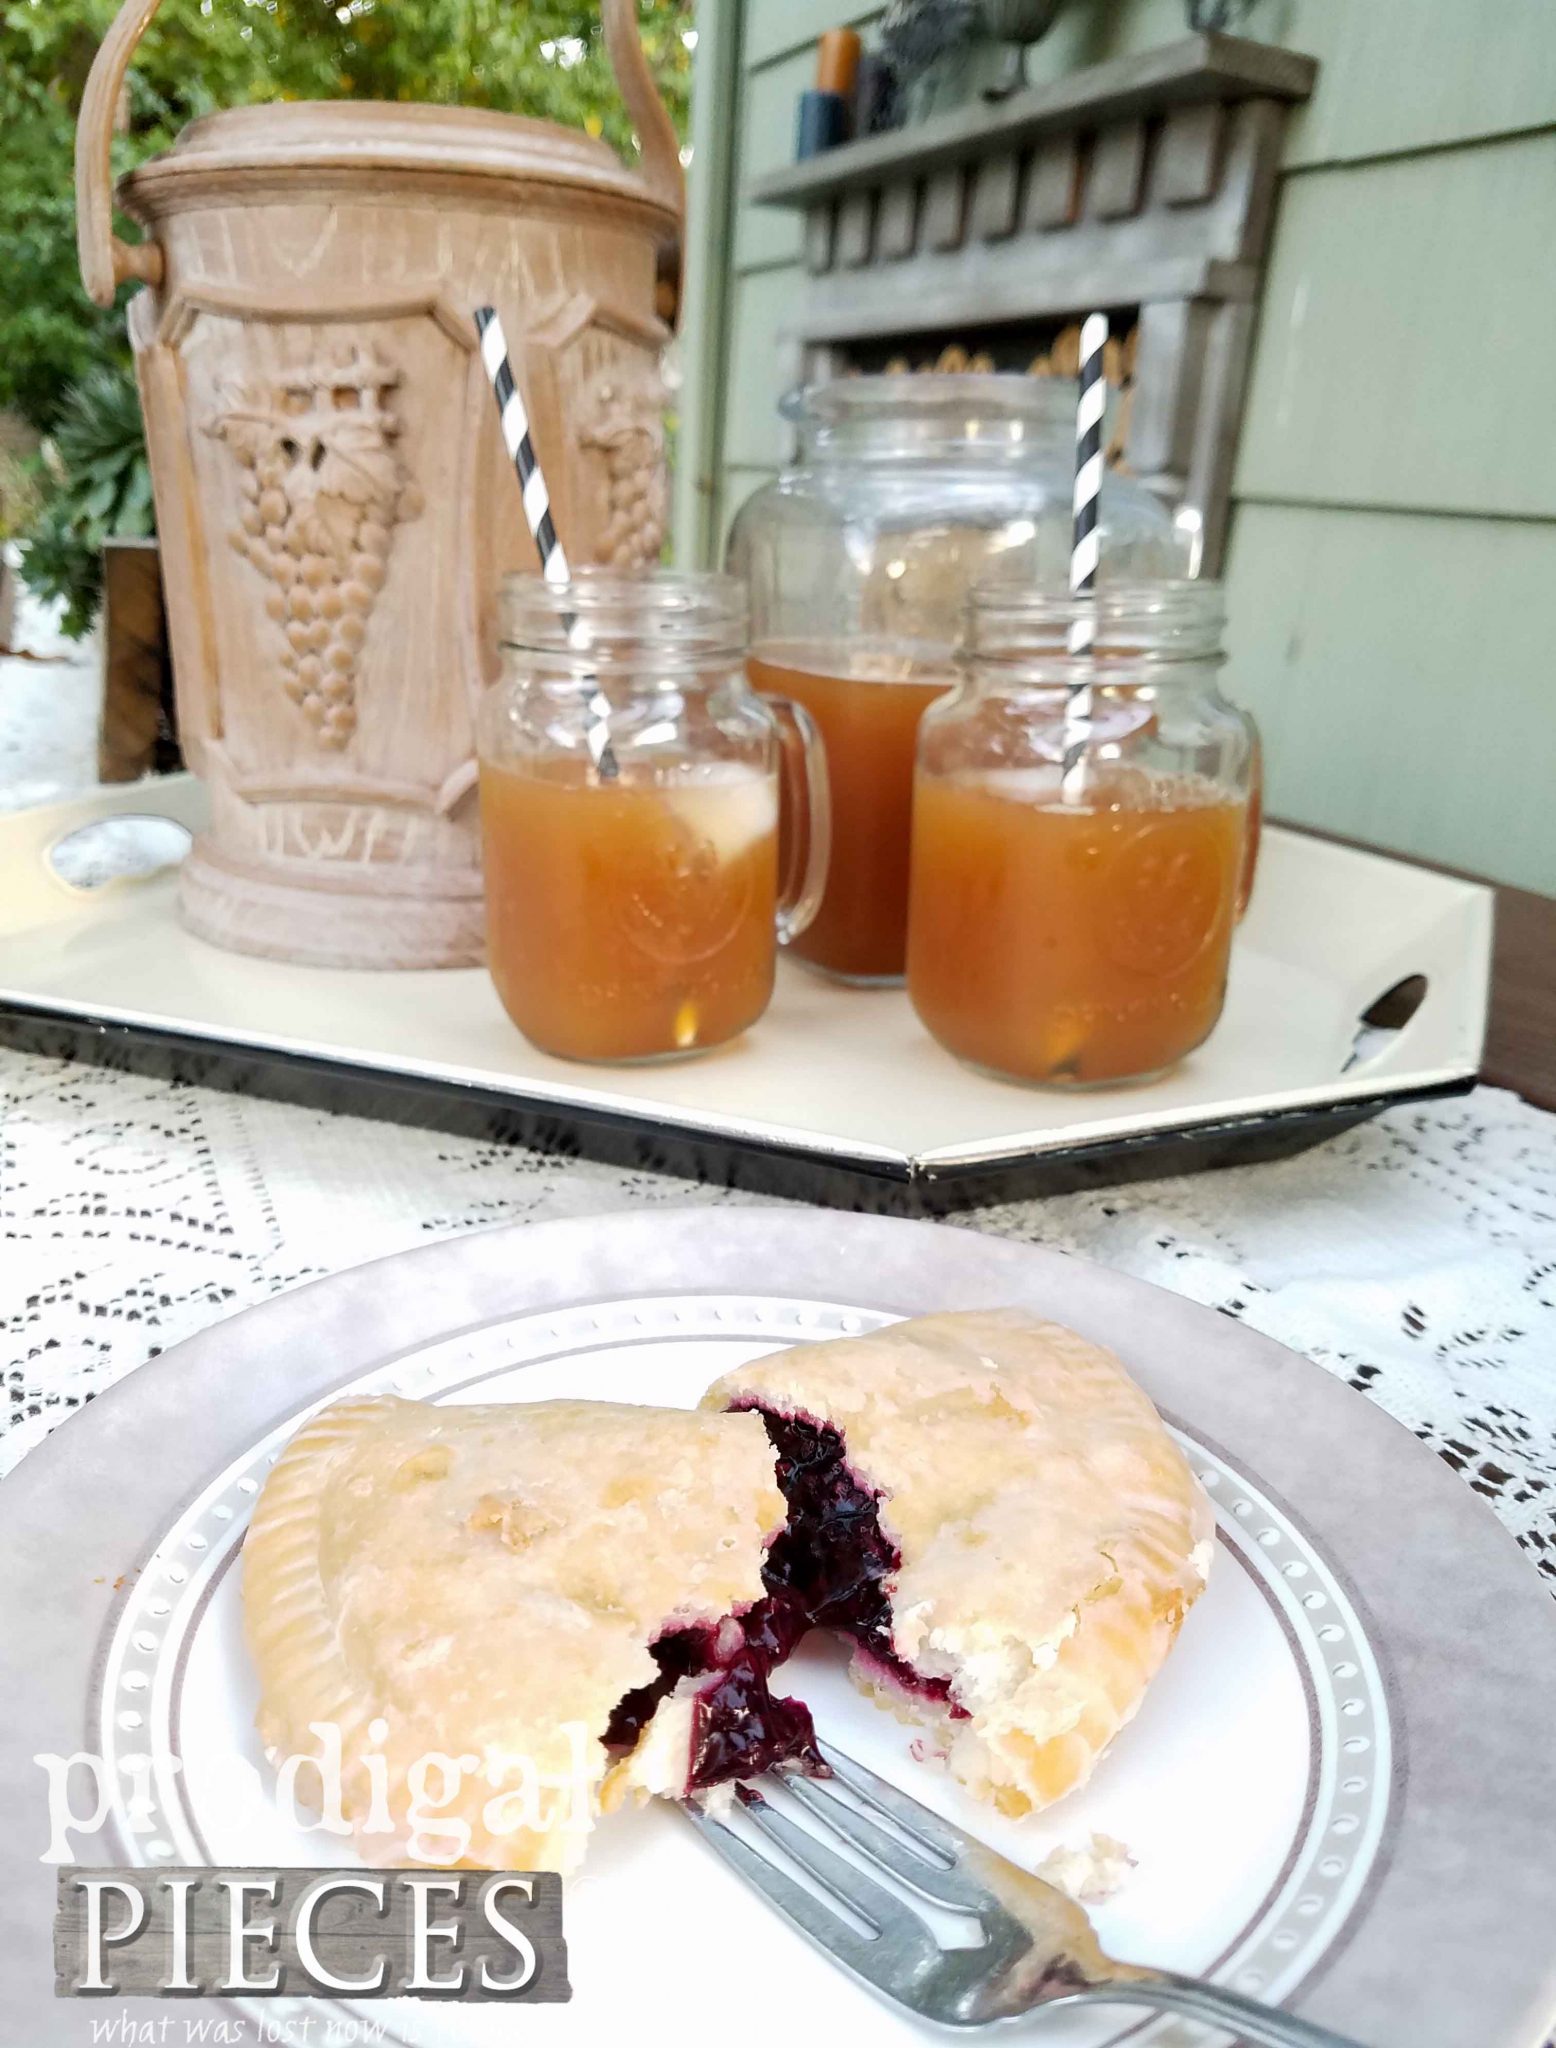 Handmade Fry Pie and Fresh Apple Cider Served Farmhouse Style by Prodigal Pieces | prodigalpieces.com